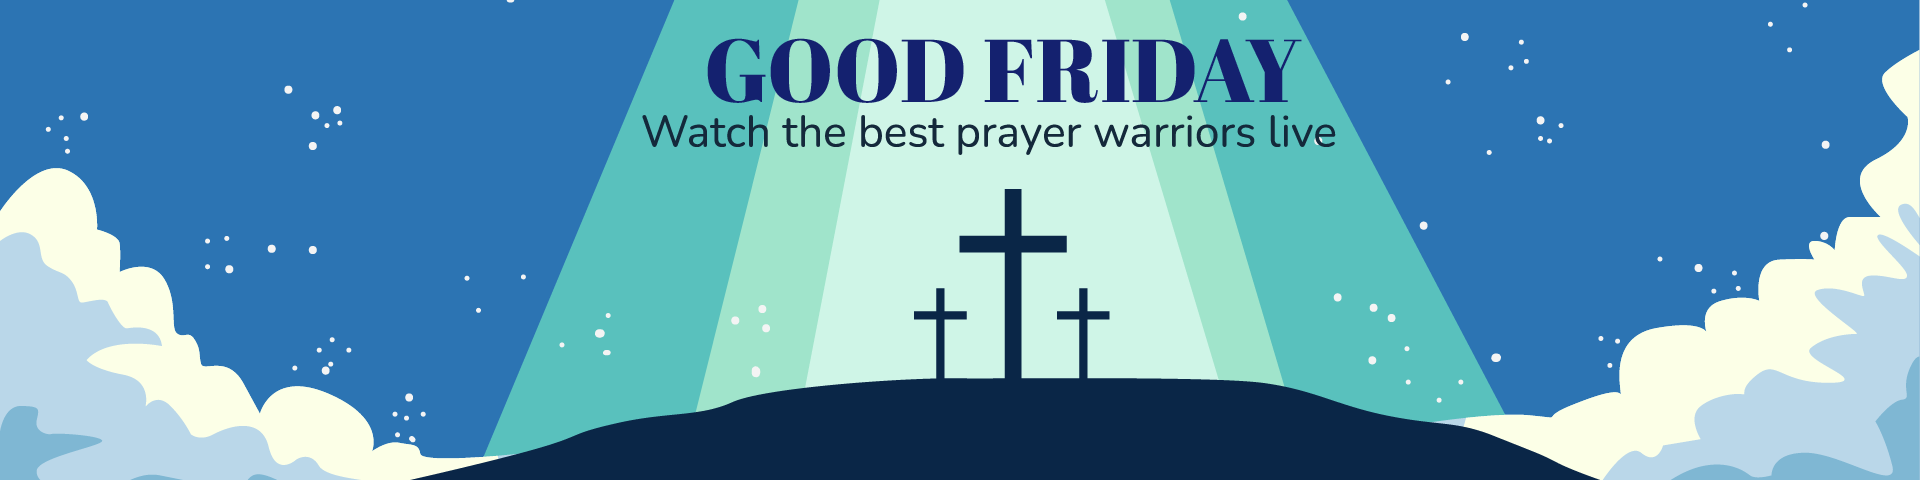 Good Friday Twitch Banner